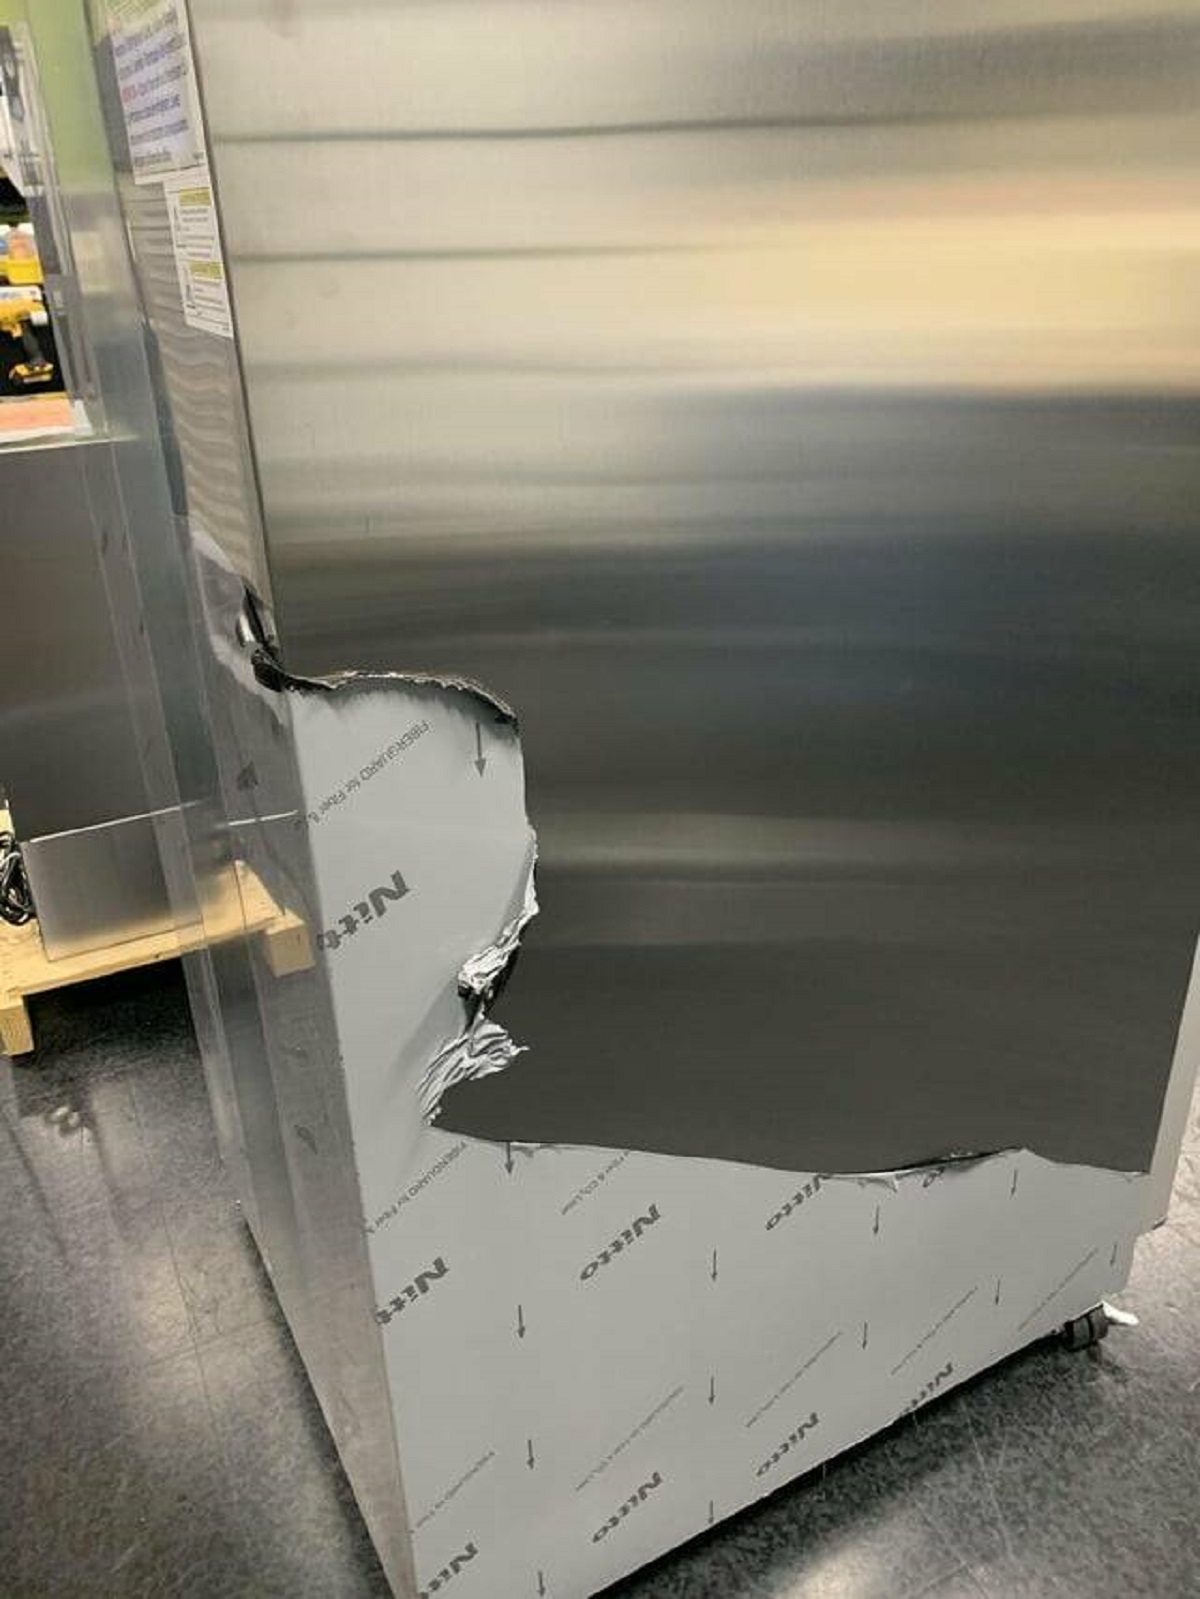 "It looks like the stainless steel is peeling off of this fridge at my work"